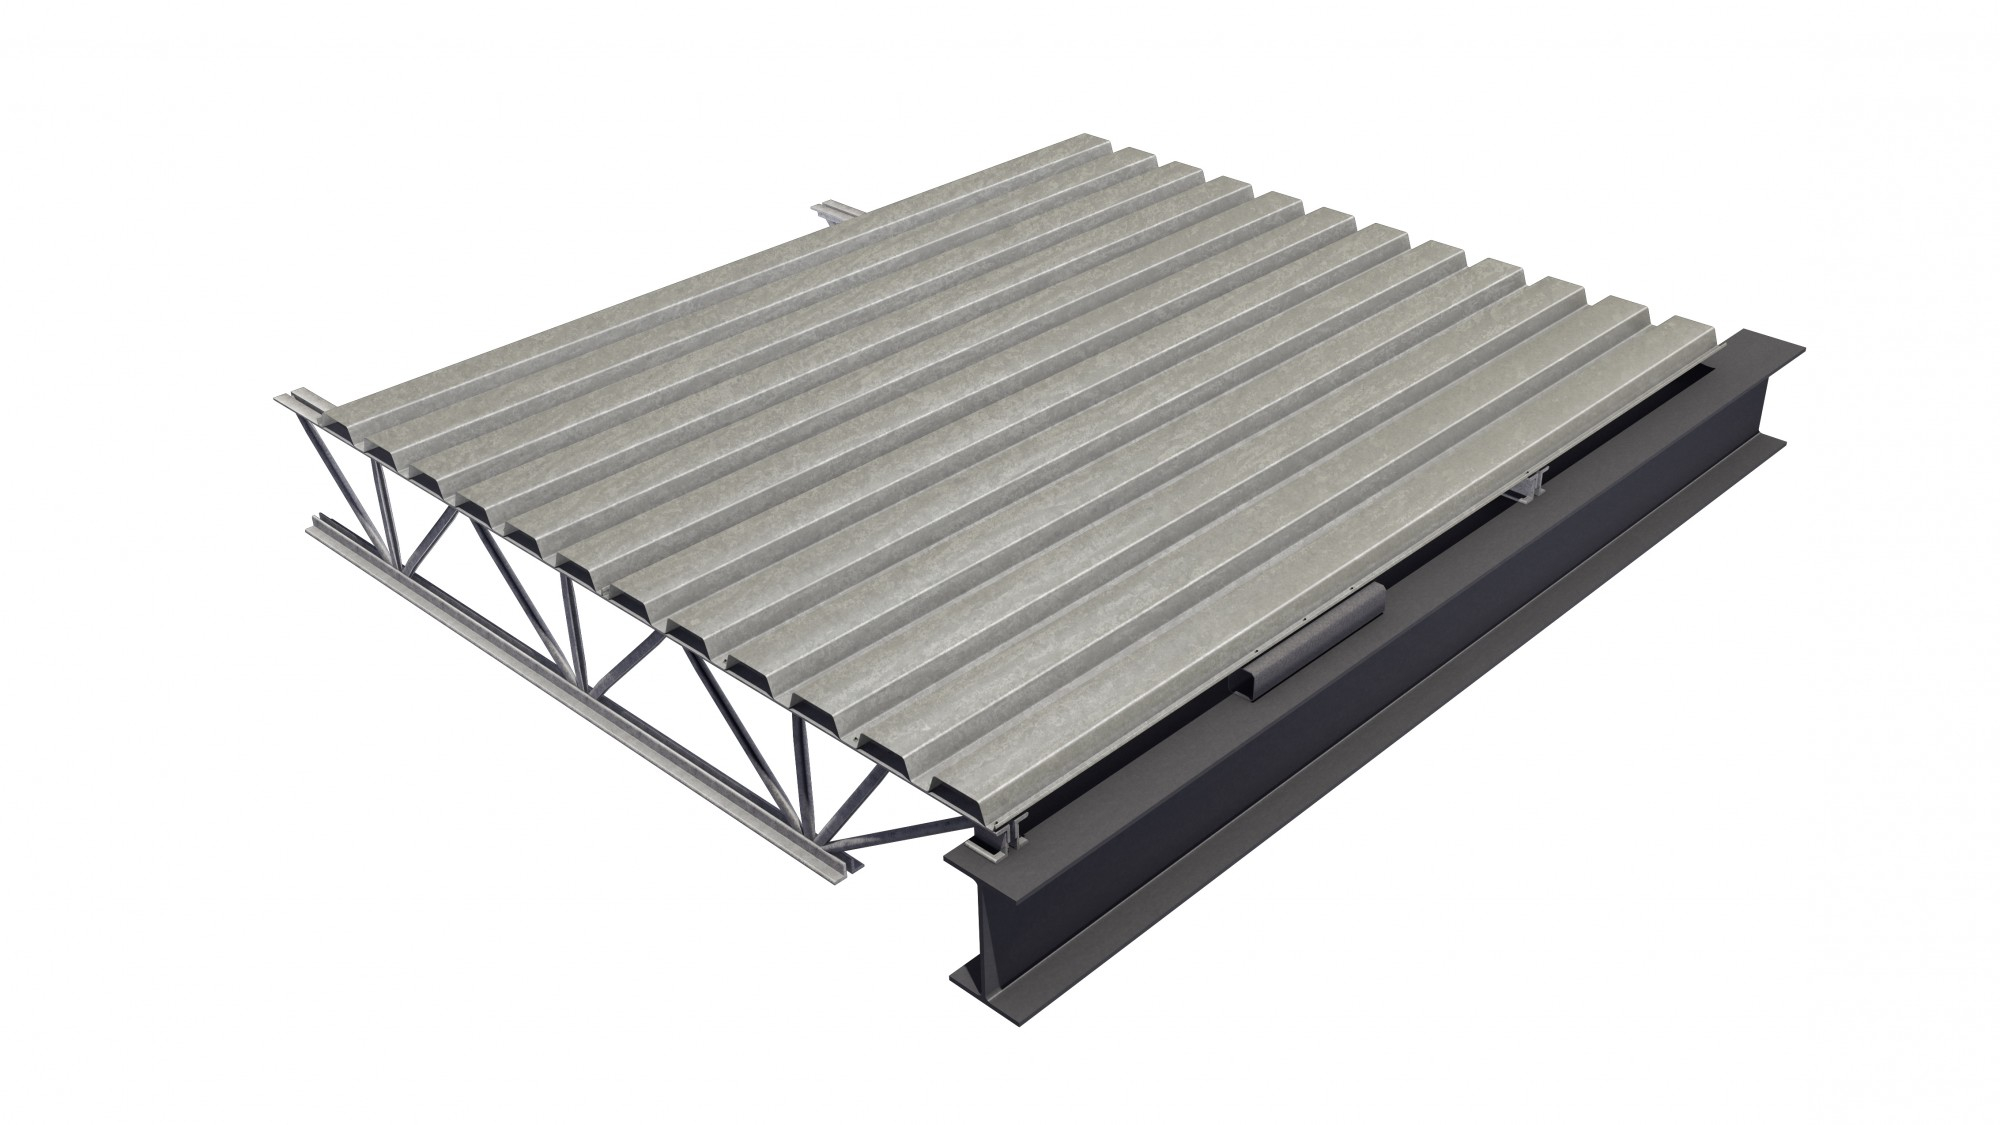 Steel Deck Is A Cold Formed Corrugated Steel Sheet Canam Buildings With Sizing 2000 X 1125 